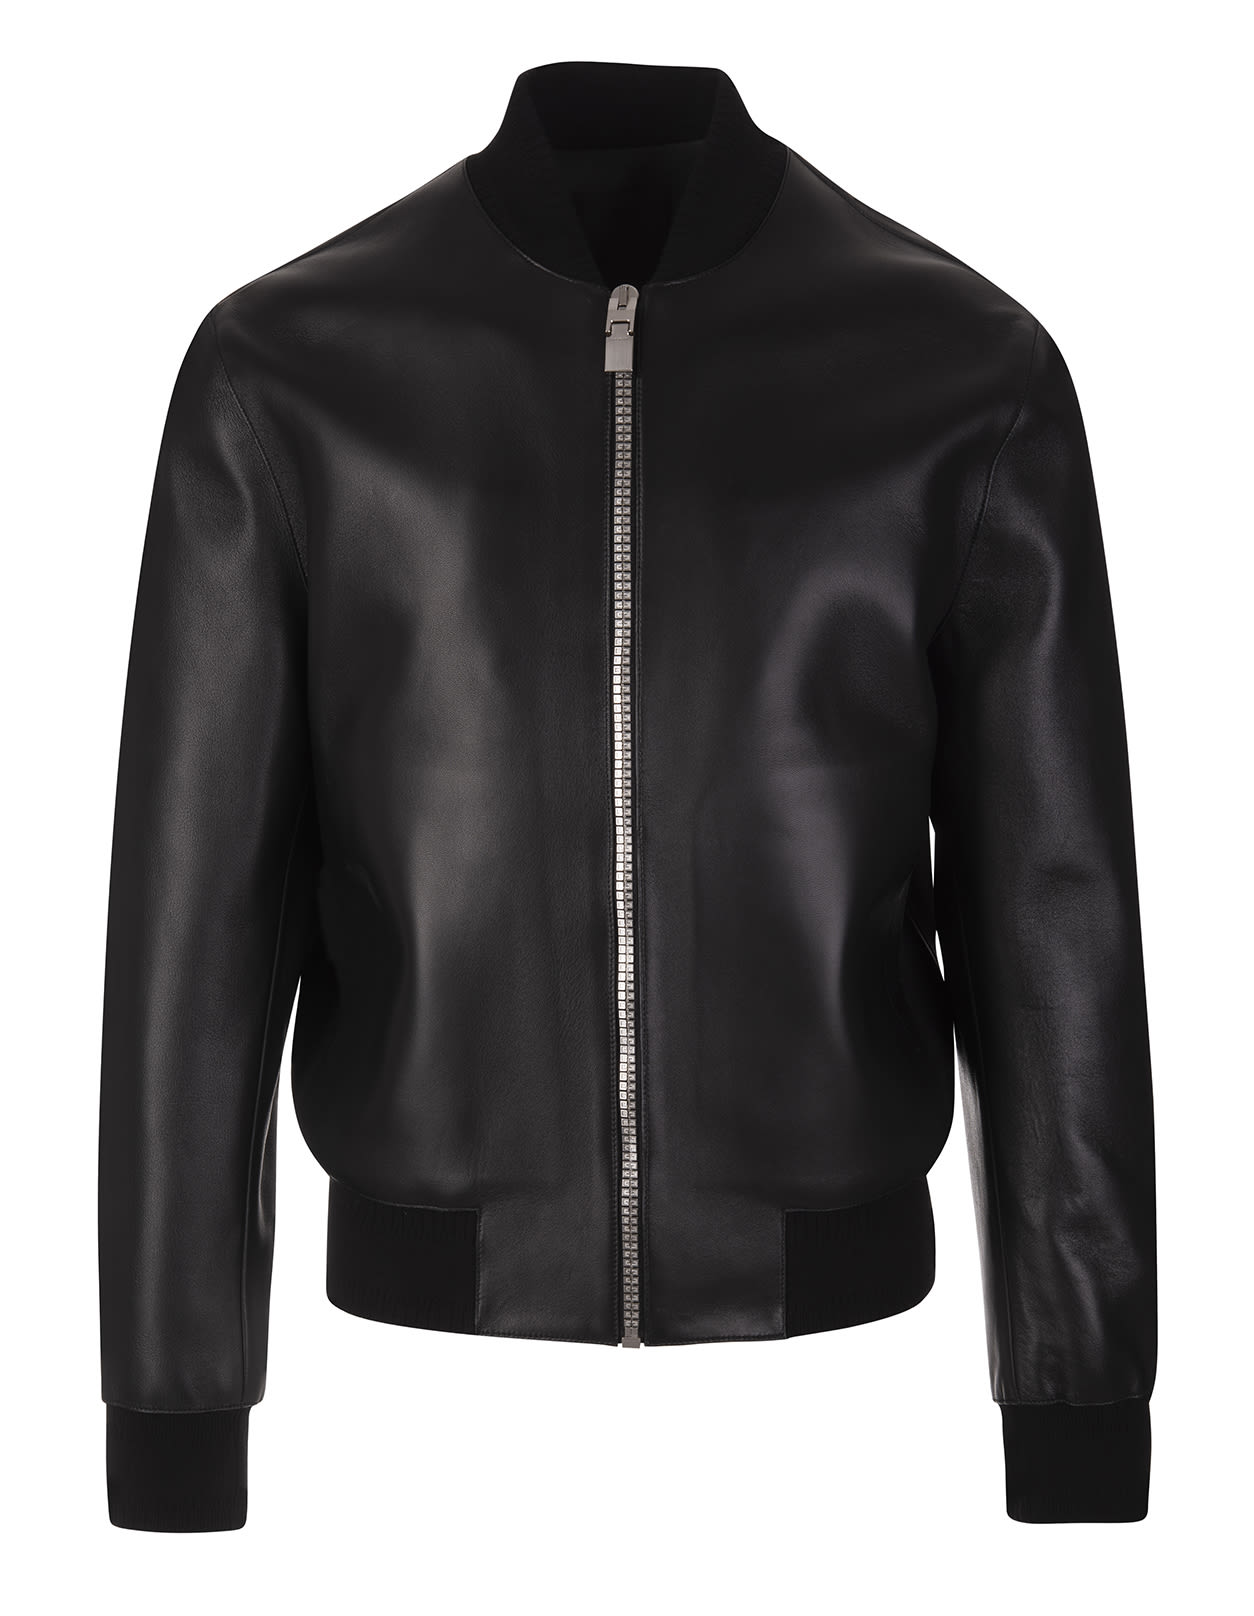 GIVENCHY MAN BOMBER JACKET IN BLACK LEATHER